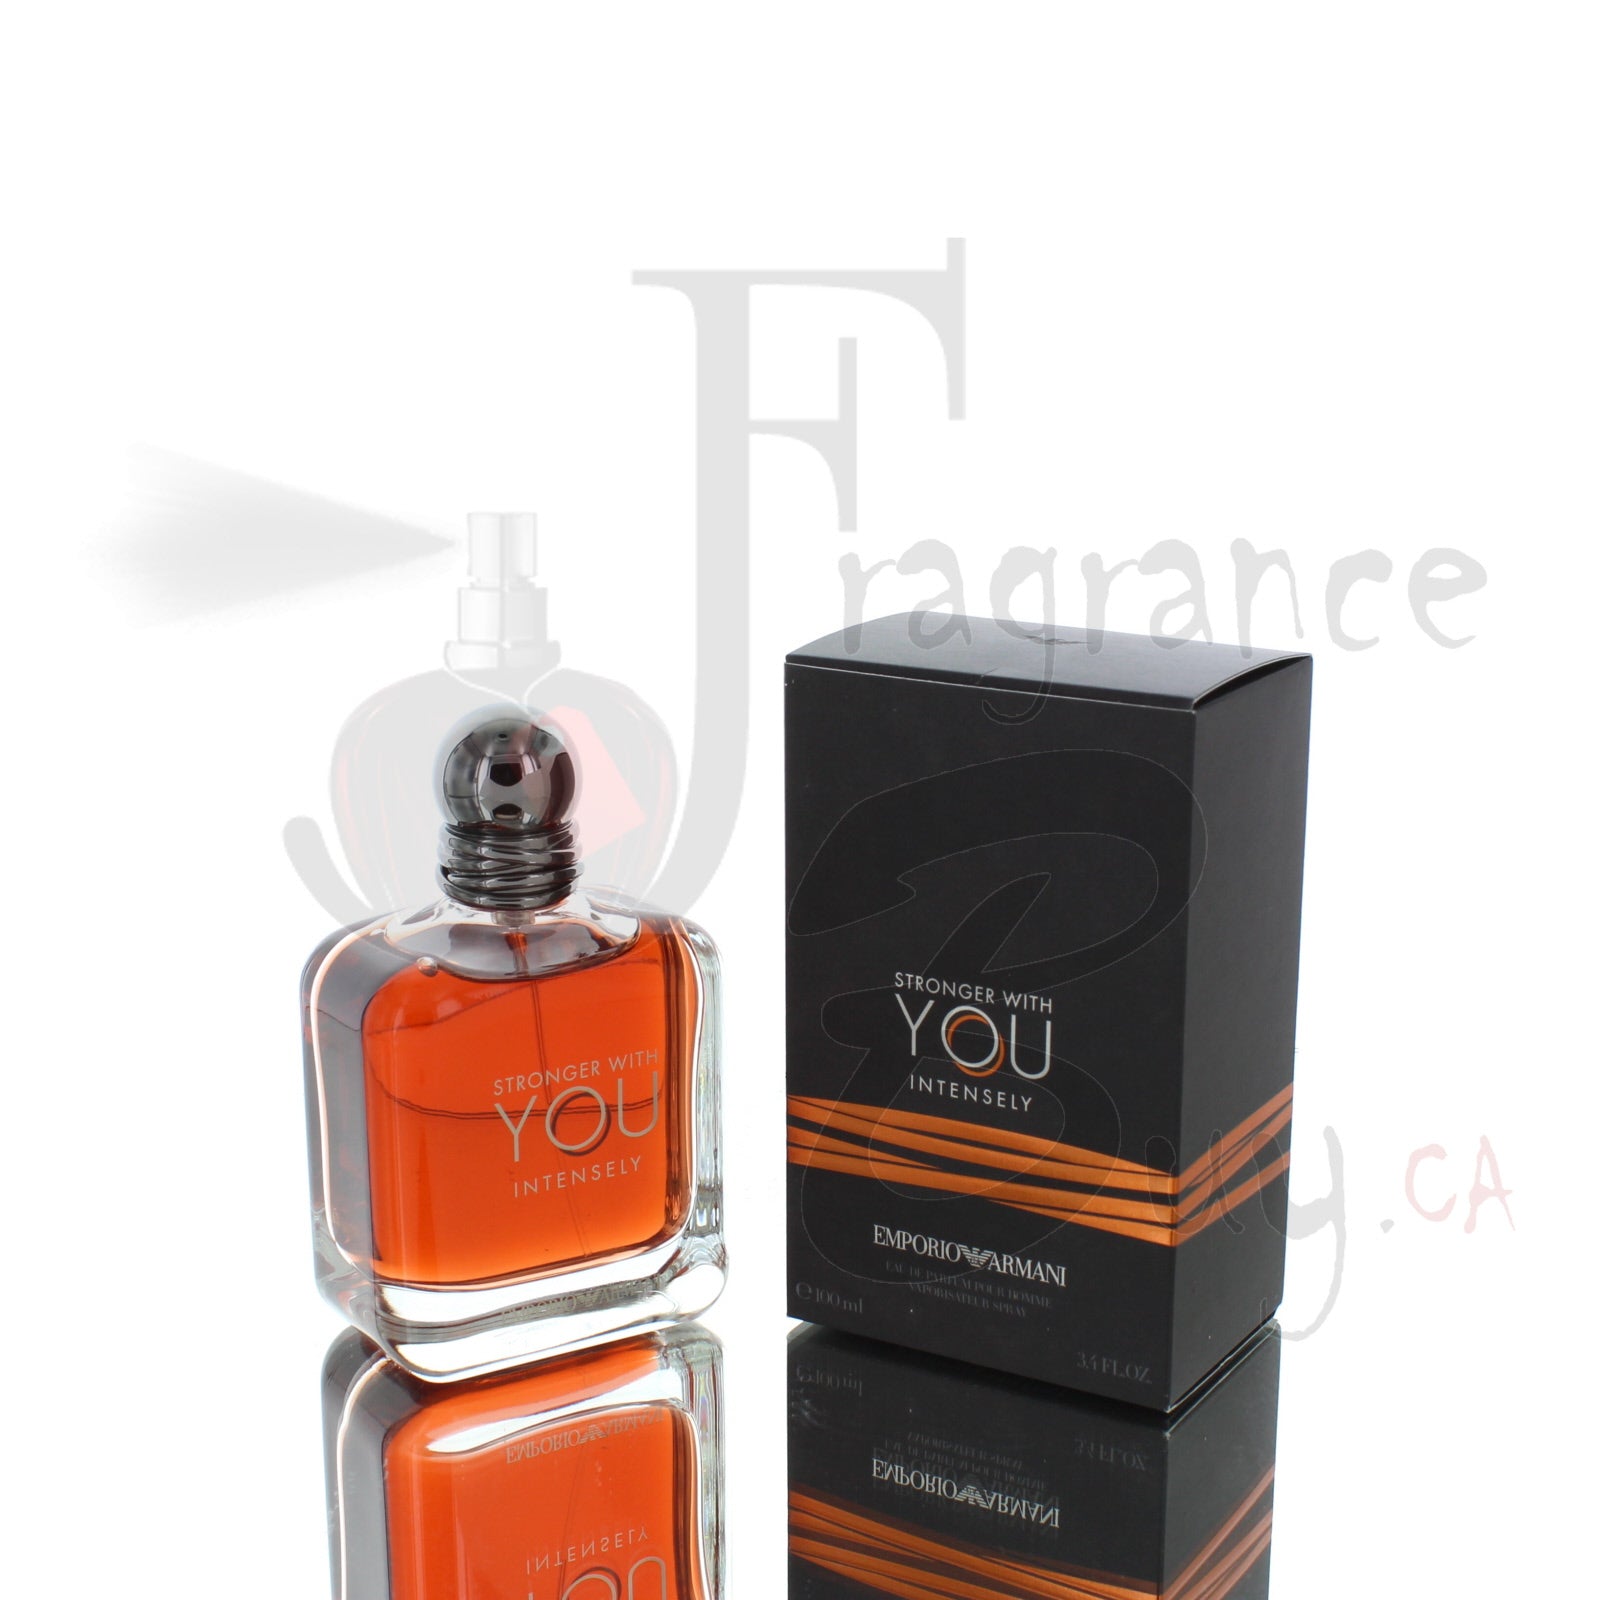 stronger with you intense armani